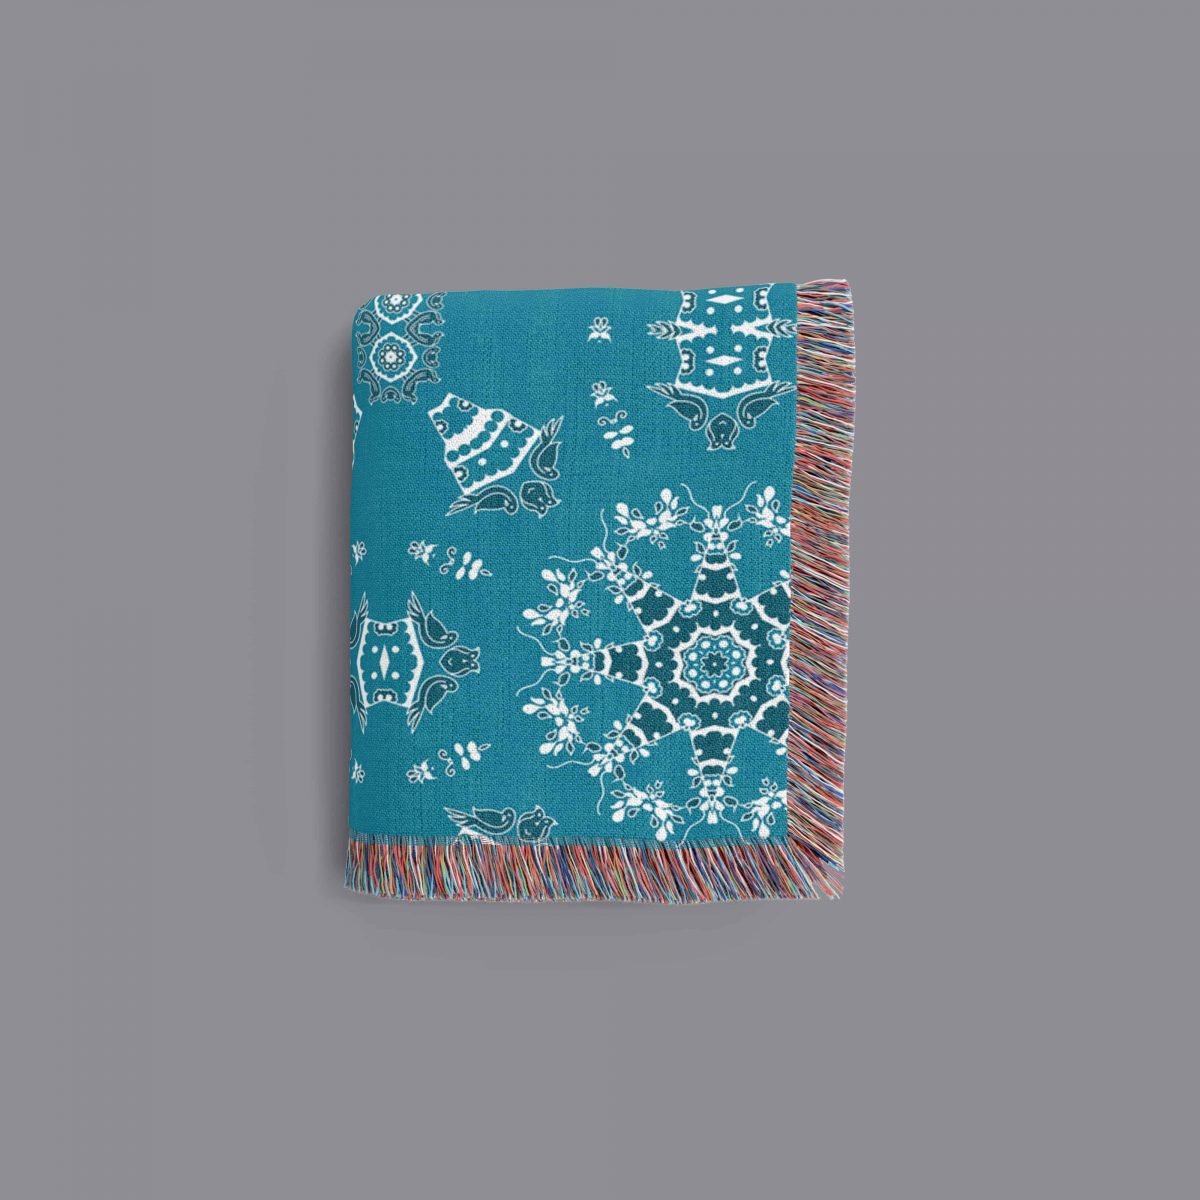 Floating Birds and Snowflakes on Blue folded2